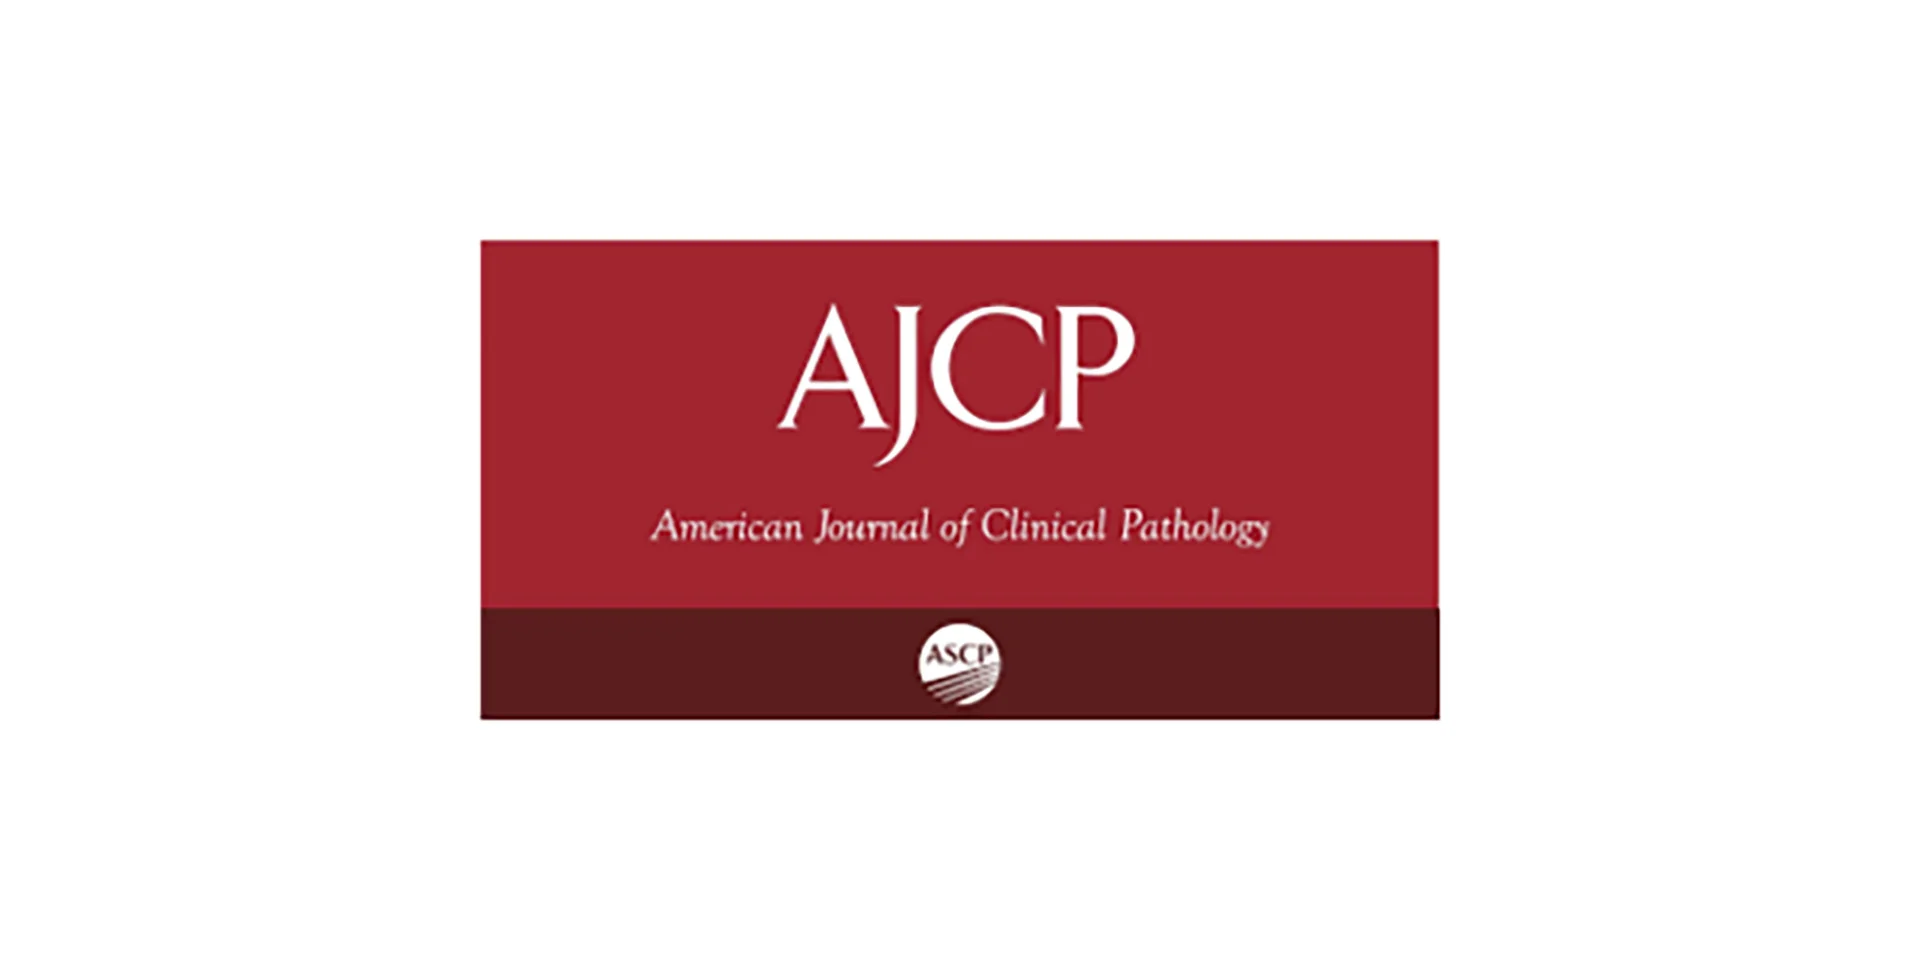 American Journal of Clinical Pathology